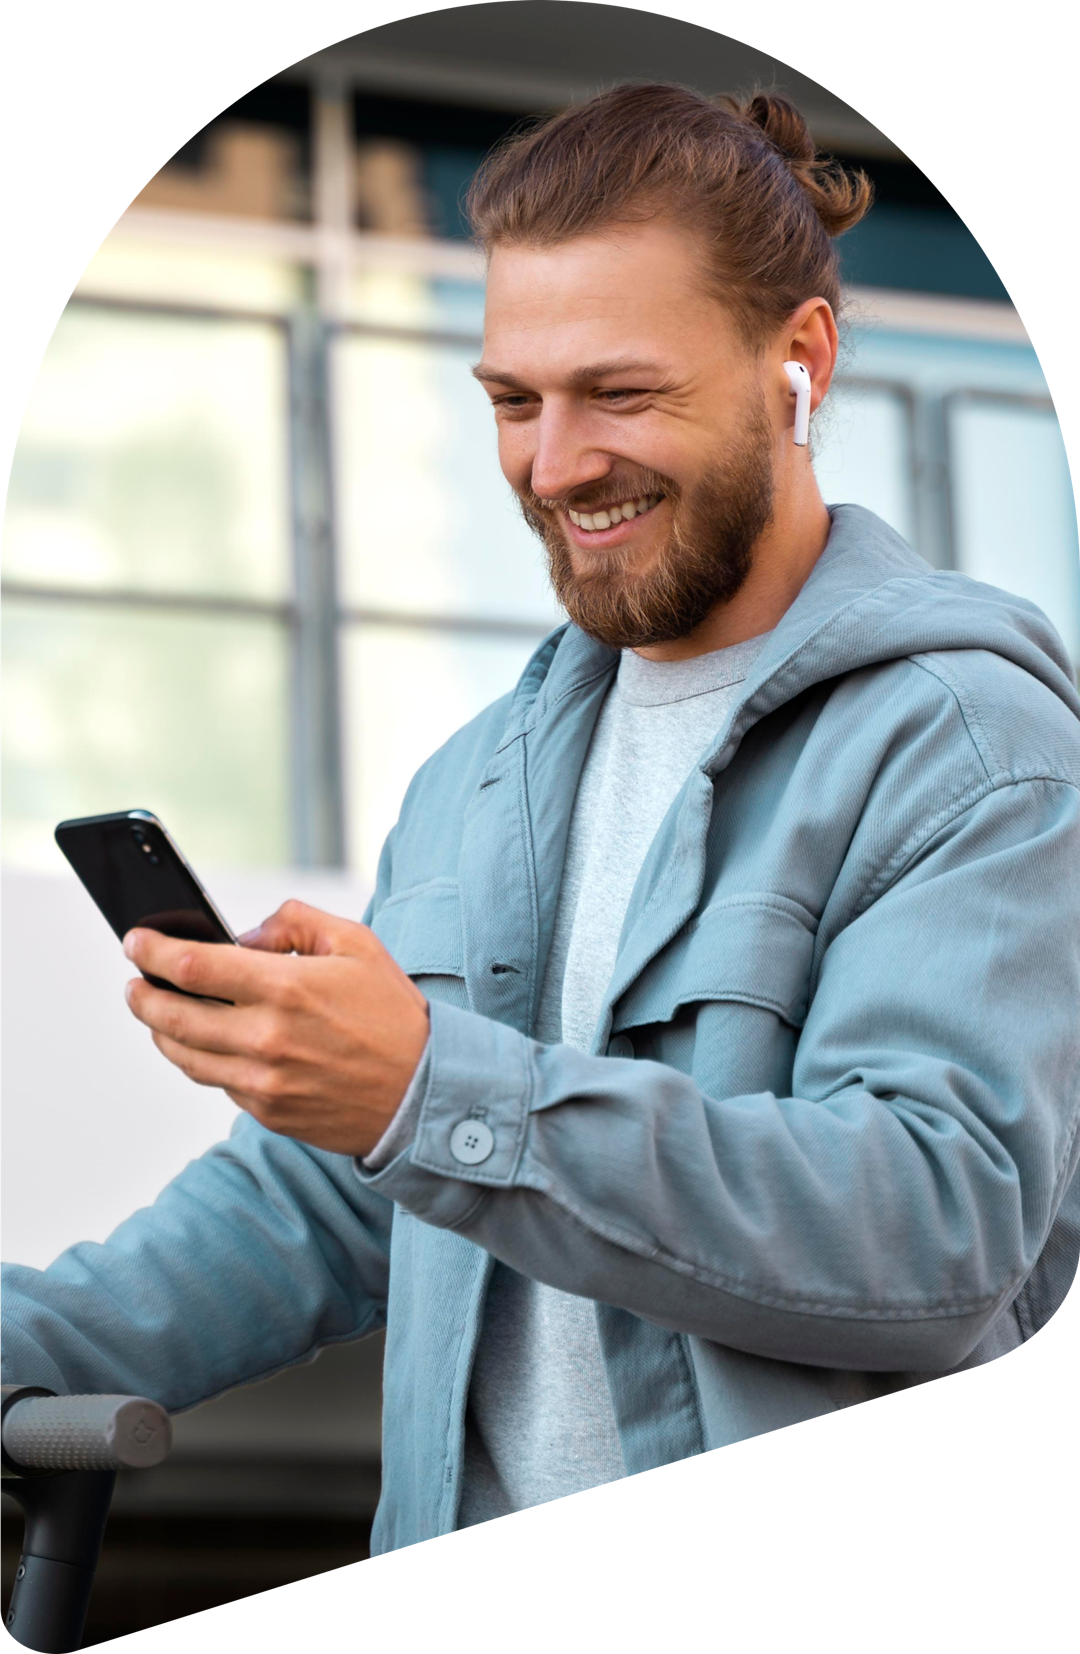 A man is checking his mobile device while smiling